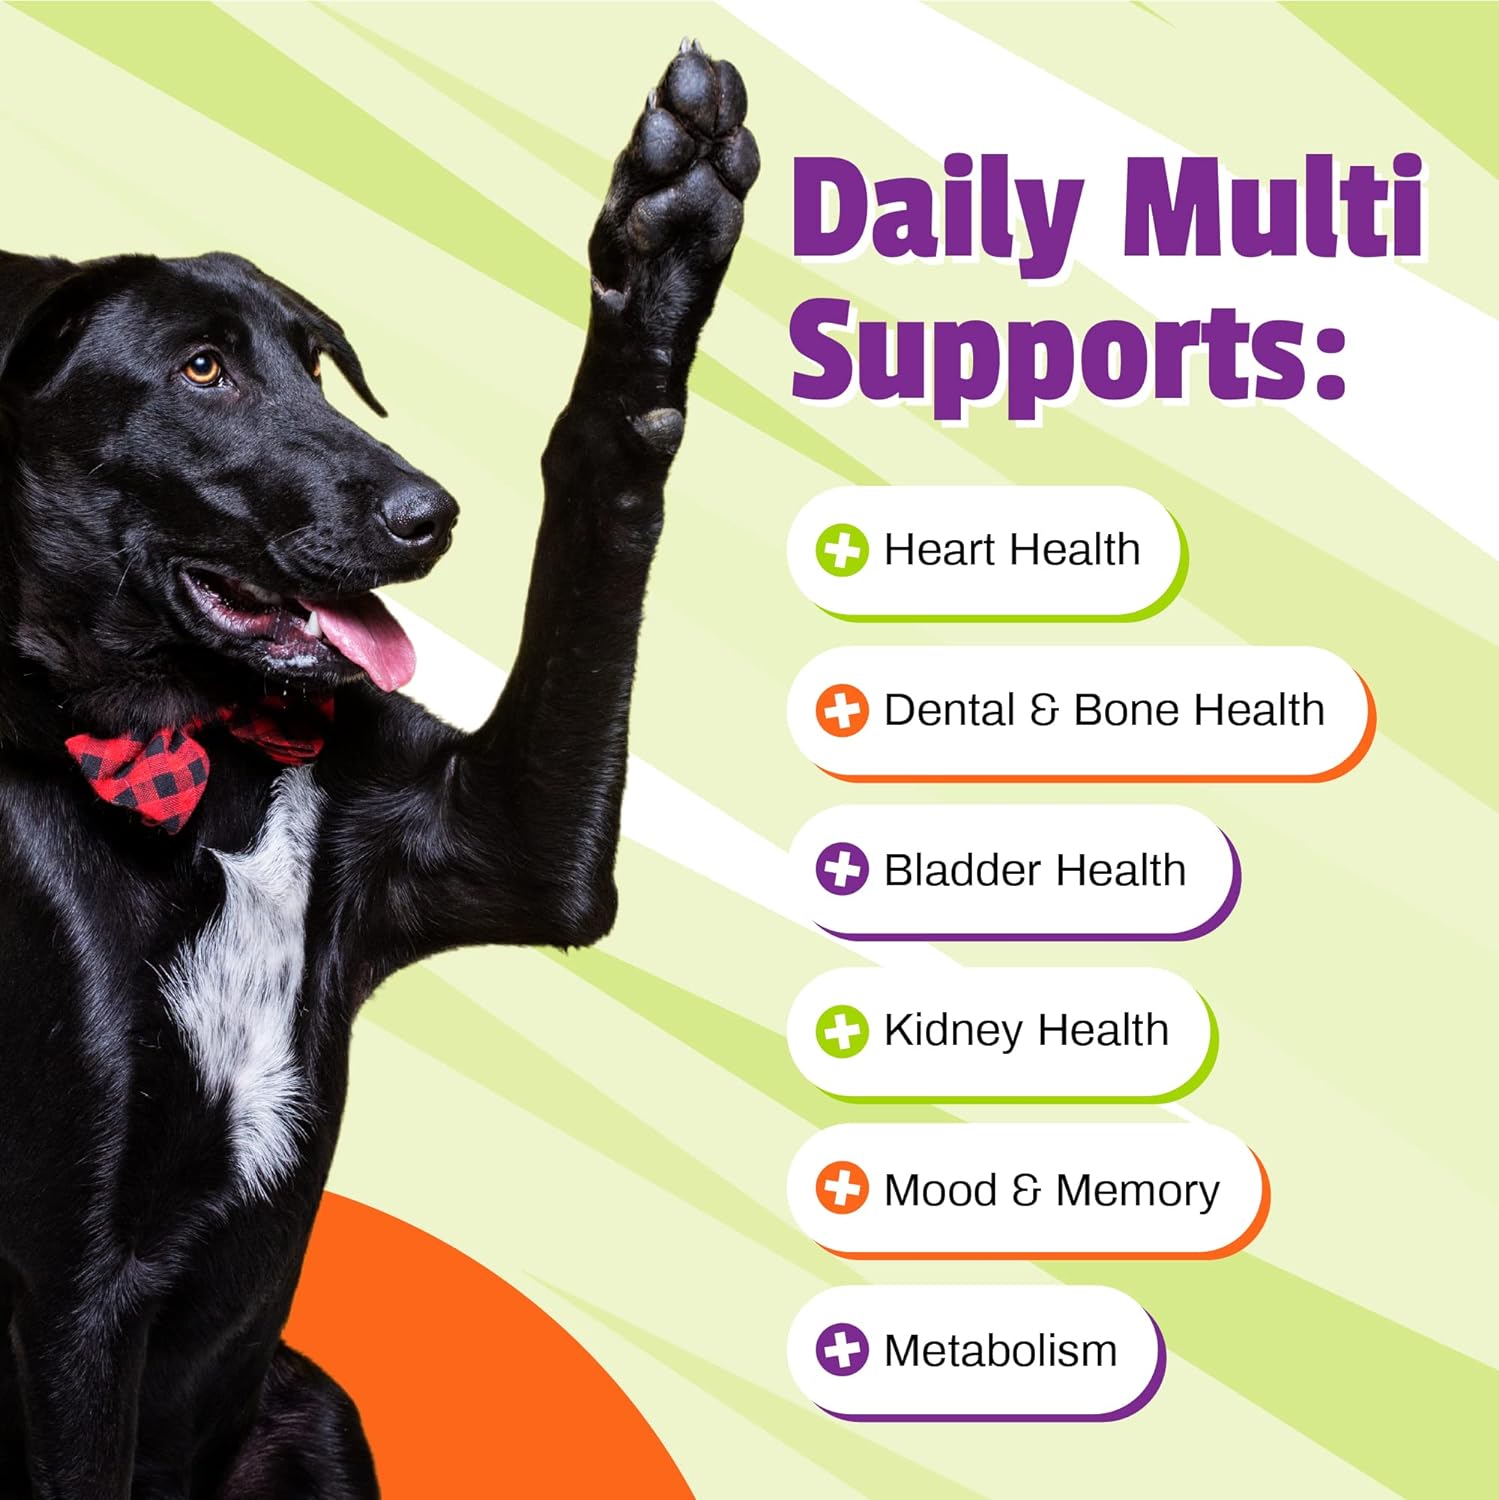 Pet Naturals Daily Multivitamin for Dogs, Veggie Flavor, 30 Chews - Yummy Chews with Amino Acids, and Antioxidants - Supports Energy, Metabolic Function and Pet Wellness : Pet Supplies